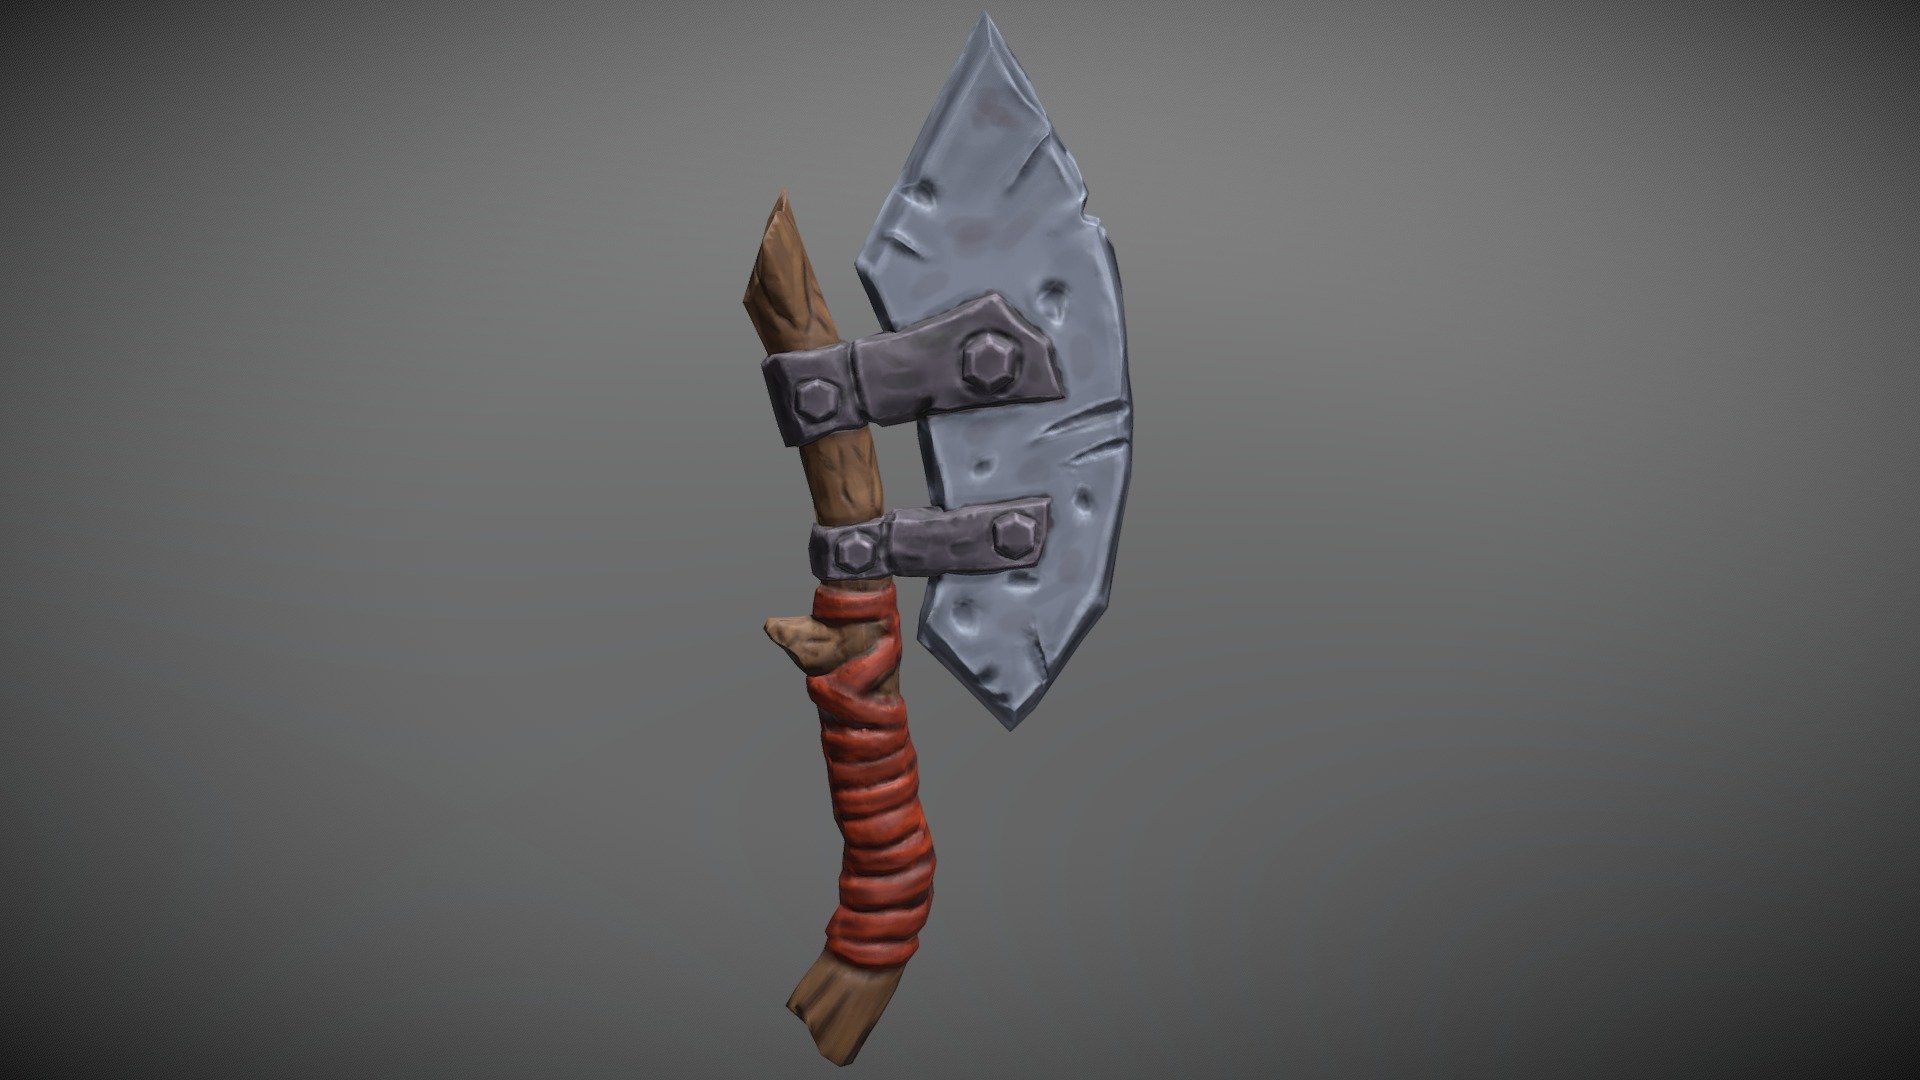 Goblin Axe Made Low poly made and hand painted  in blender.

Normal Map - Metalic - hand painted texture

Made as part with Goblin Char 

Based on concept ork weapons https://www.artstation.com/artwork/o8ARJ

Buy me a coffee https://ko-fi.com/bagatir# - Goblin Axe - Download Free 3D model by C. Anastasiadis (@bagatir) 3d model